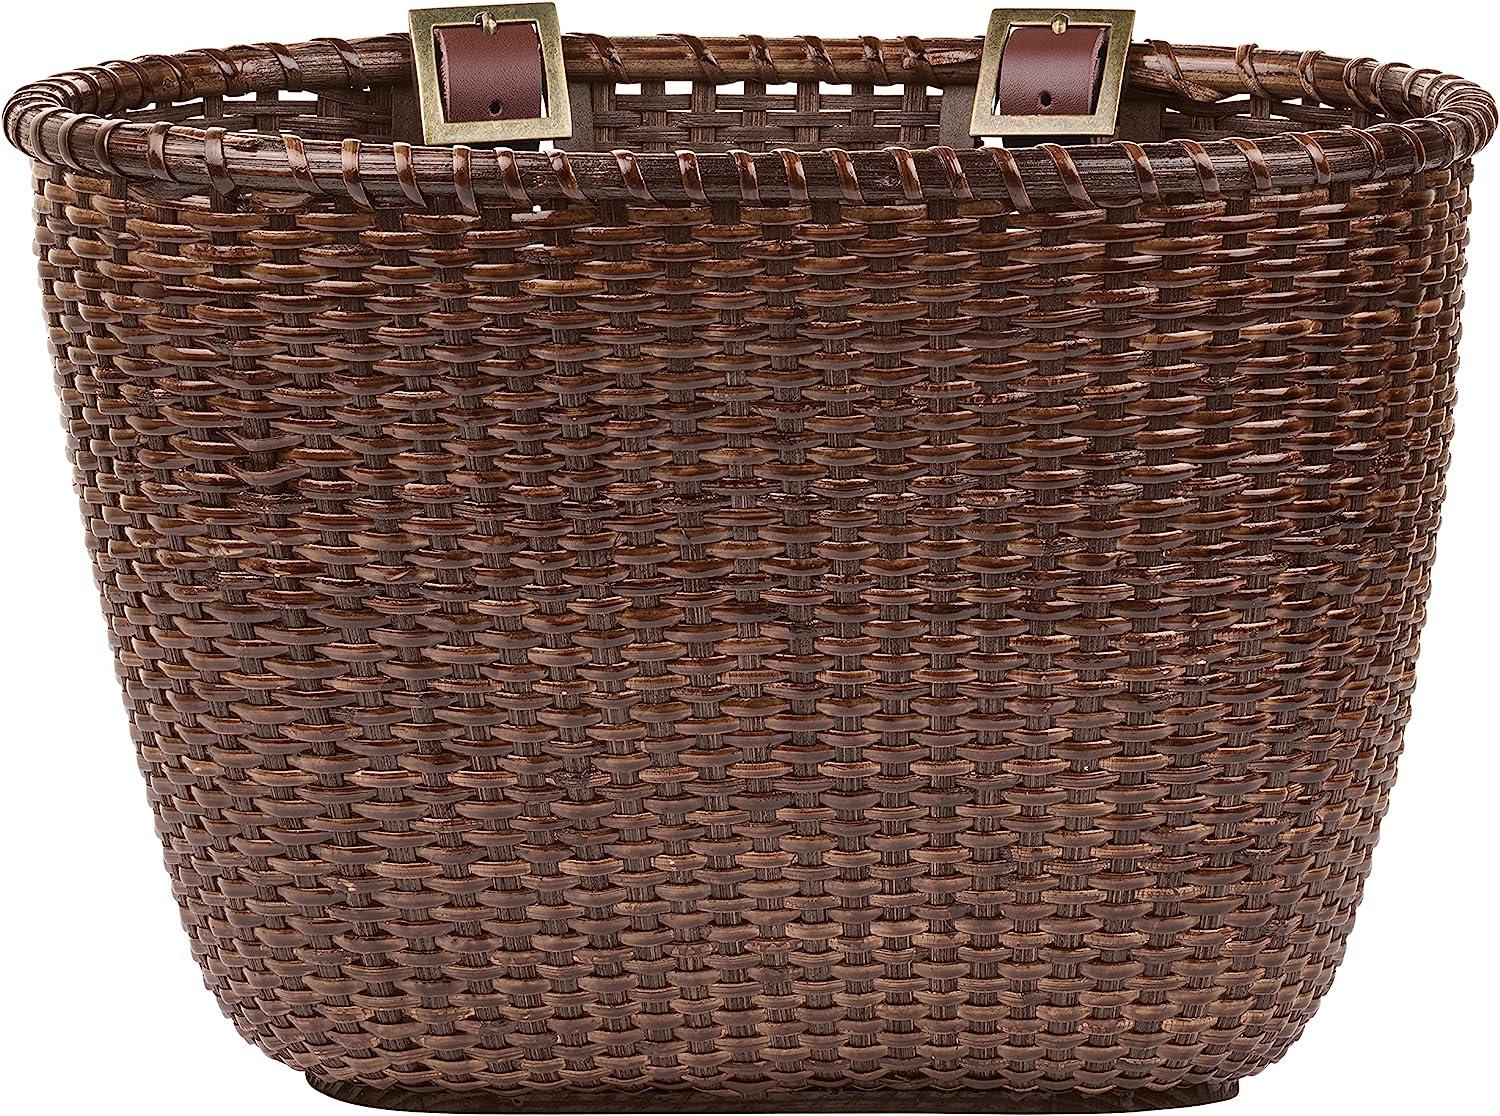 Retrospec Bicycle Cane Woven Rectangular Toto Basket with Authentic Leather Straps & Brass Buckles, Black